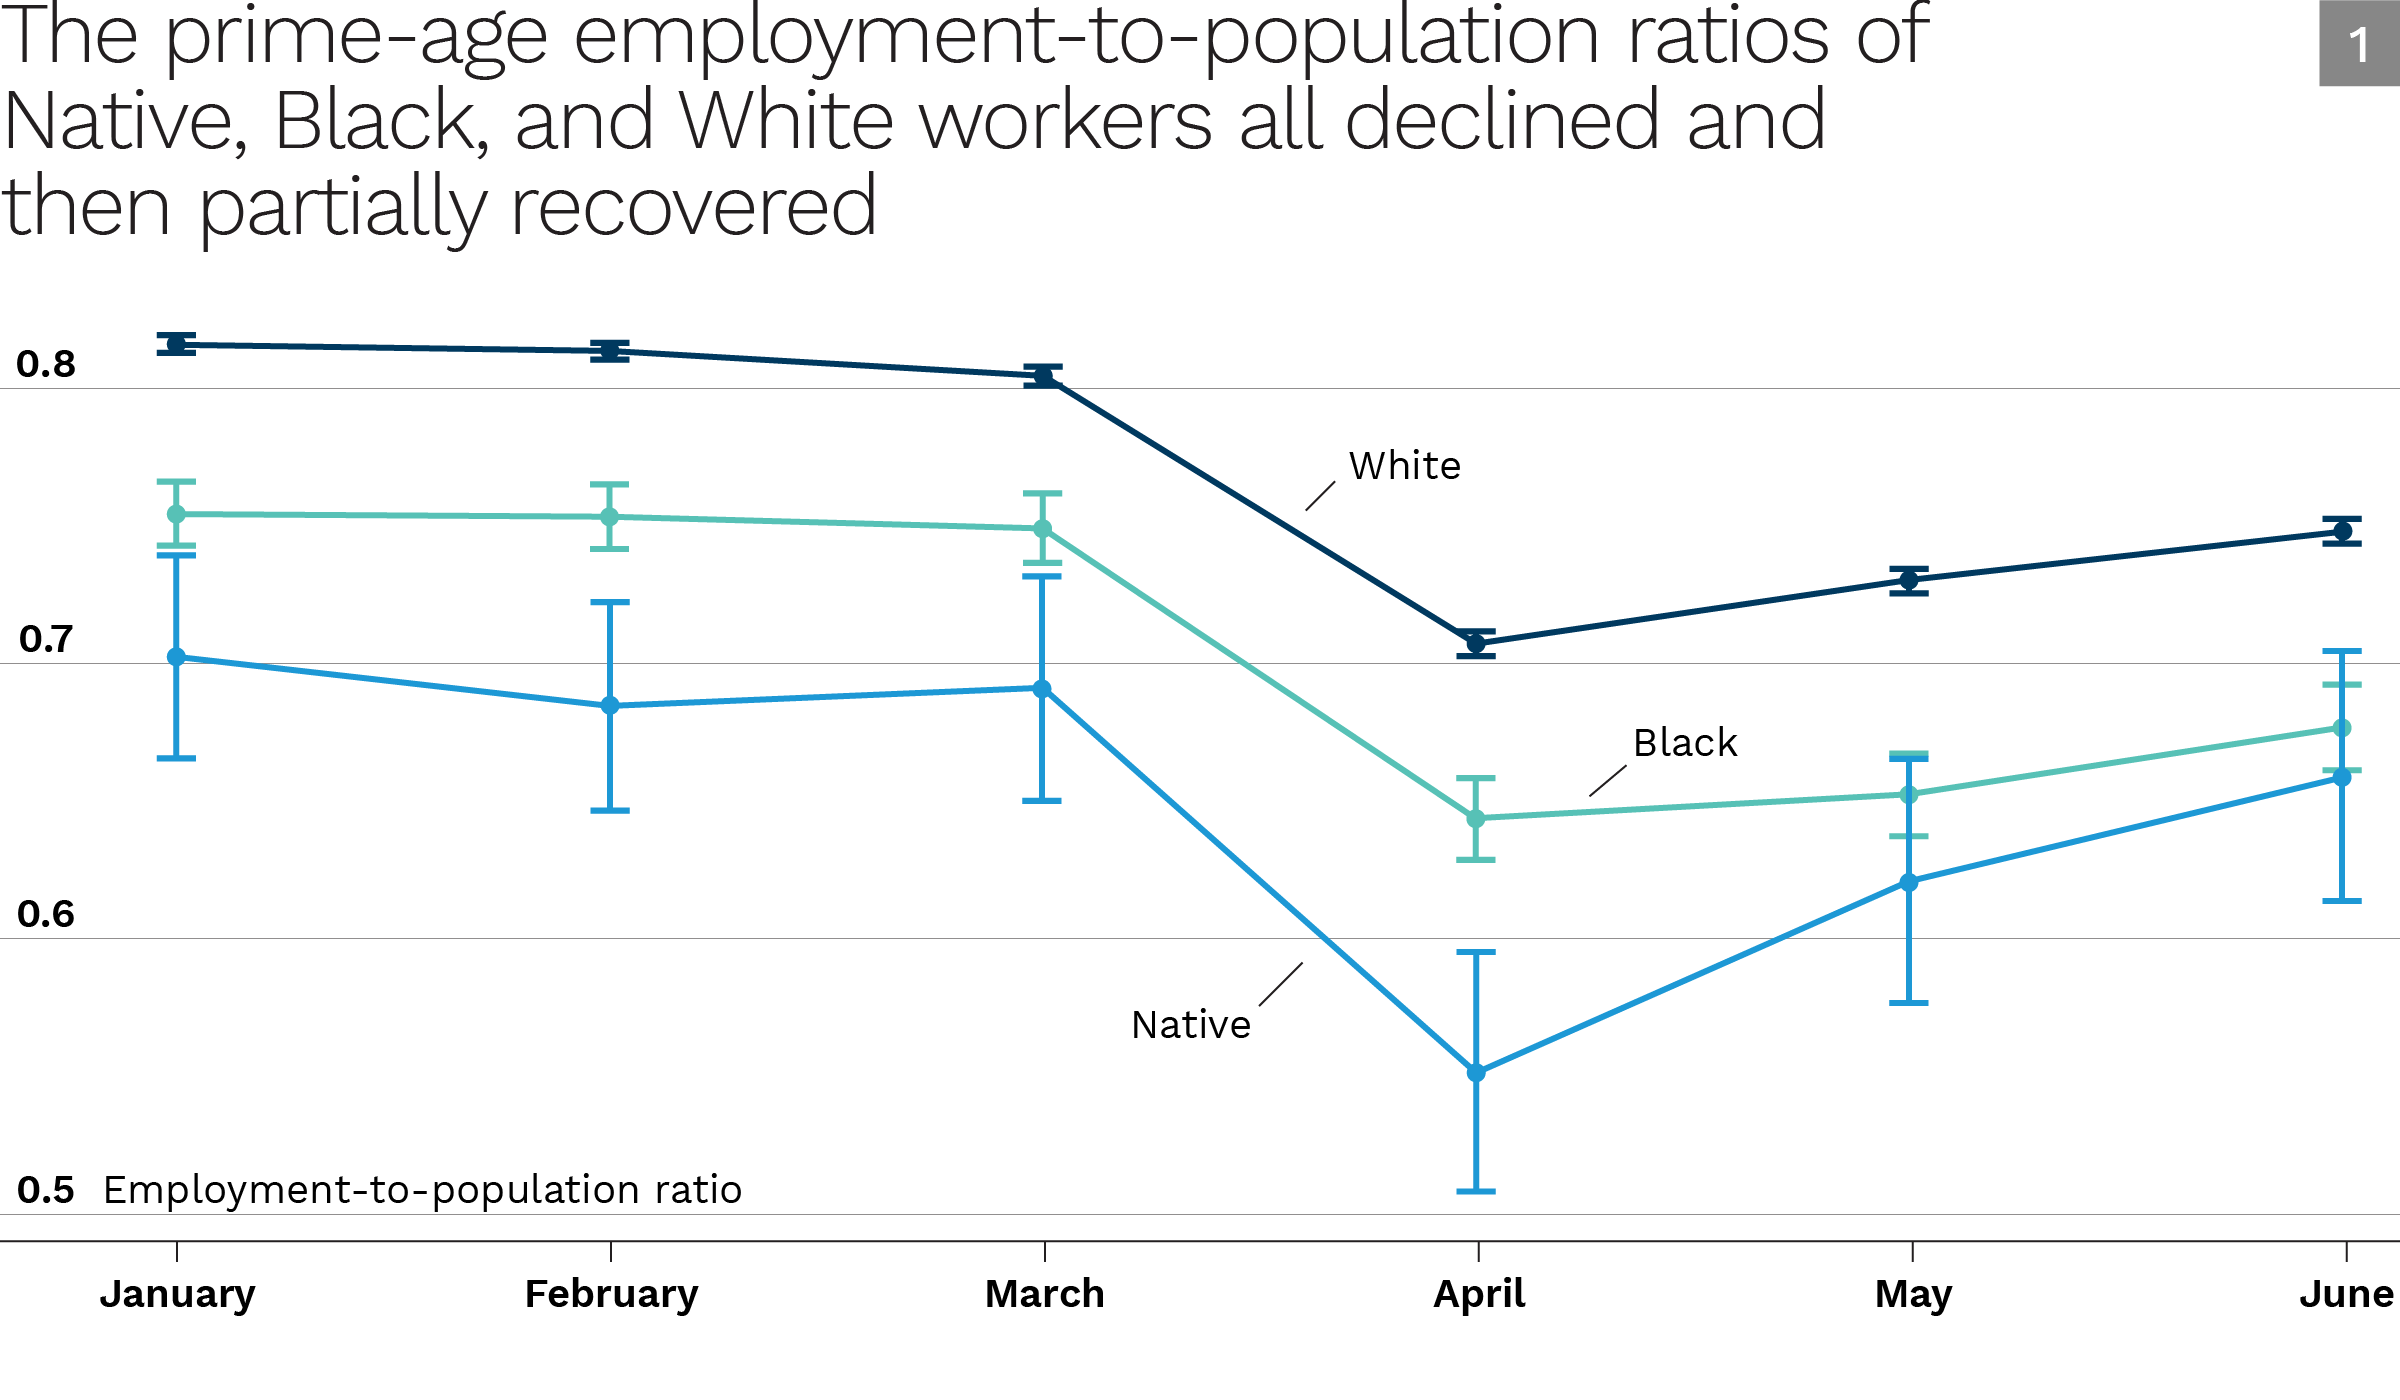 Figure 1: The prime-age employment-to-population ratios of Native, Black, and White workers all declined and then partially recovered